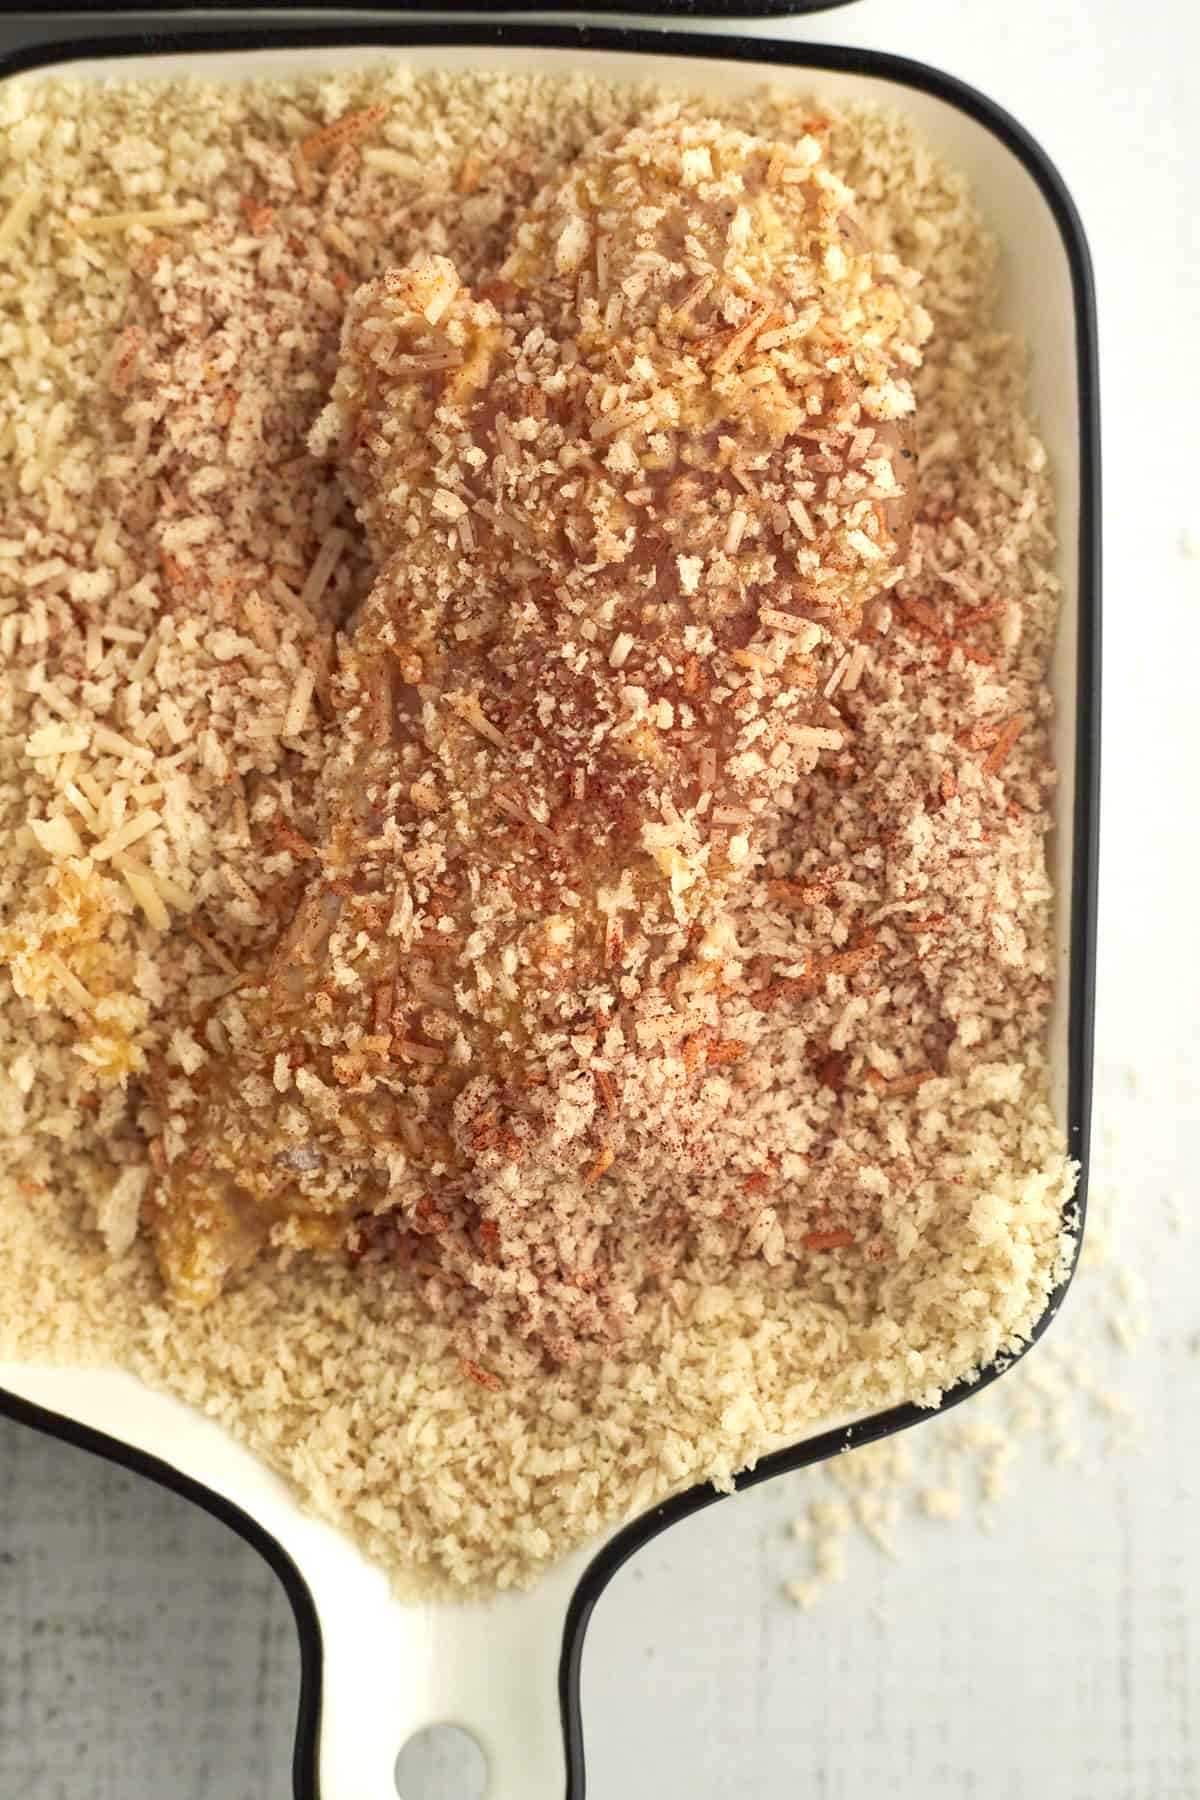 raw chicken being coated with breadcrumbs